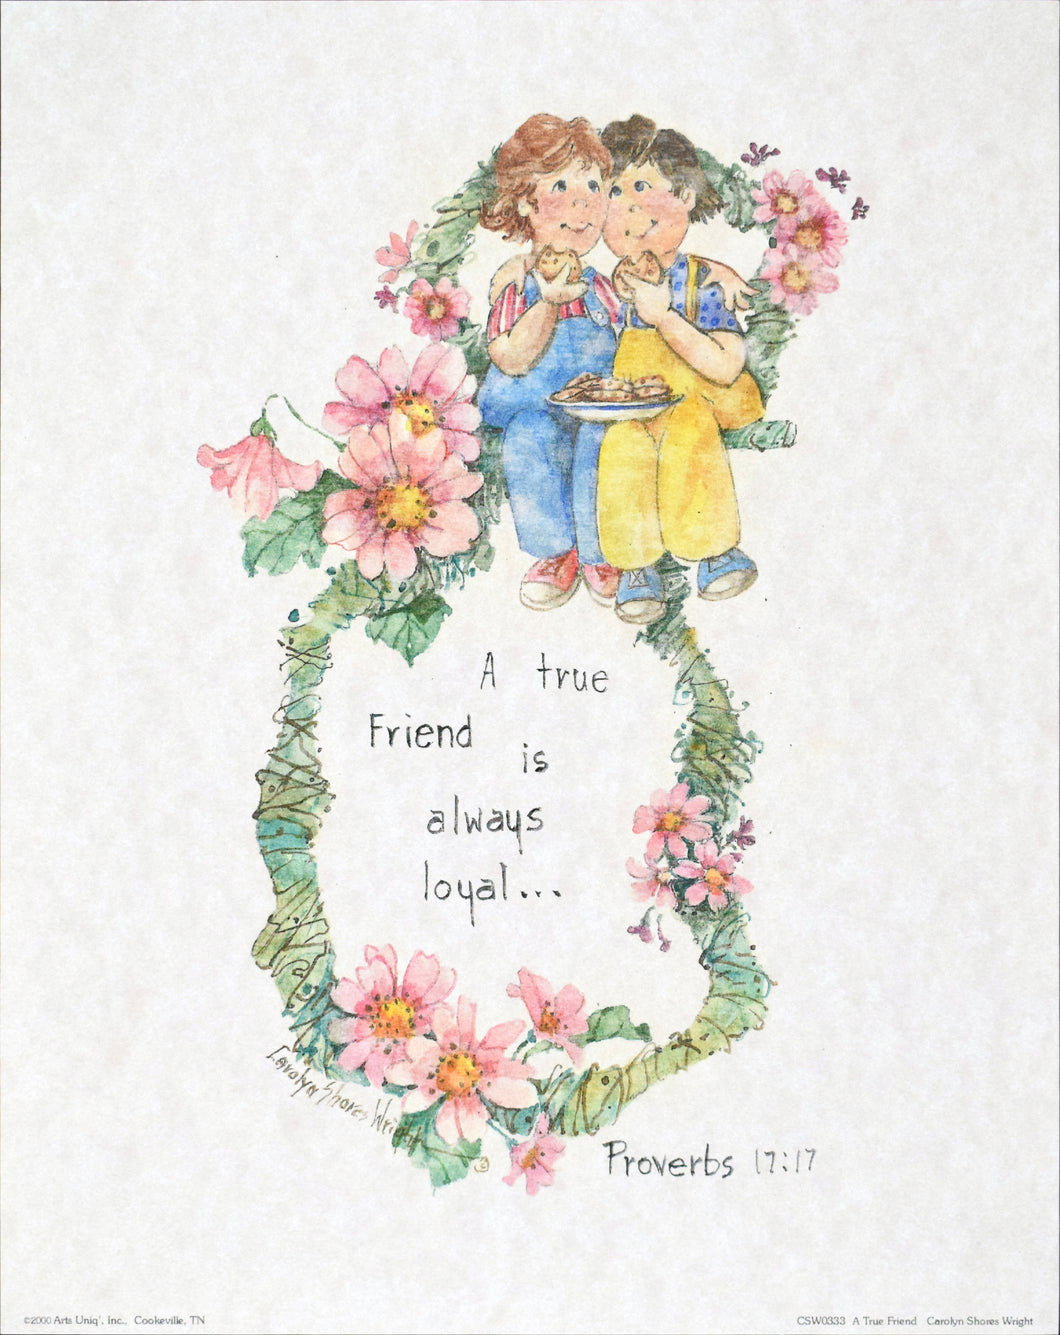 A True Friend is always loyal by Carolyn Shores Wright proverbs 17:17 poster with two friends eating cookies